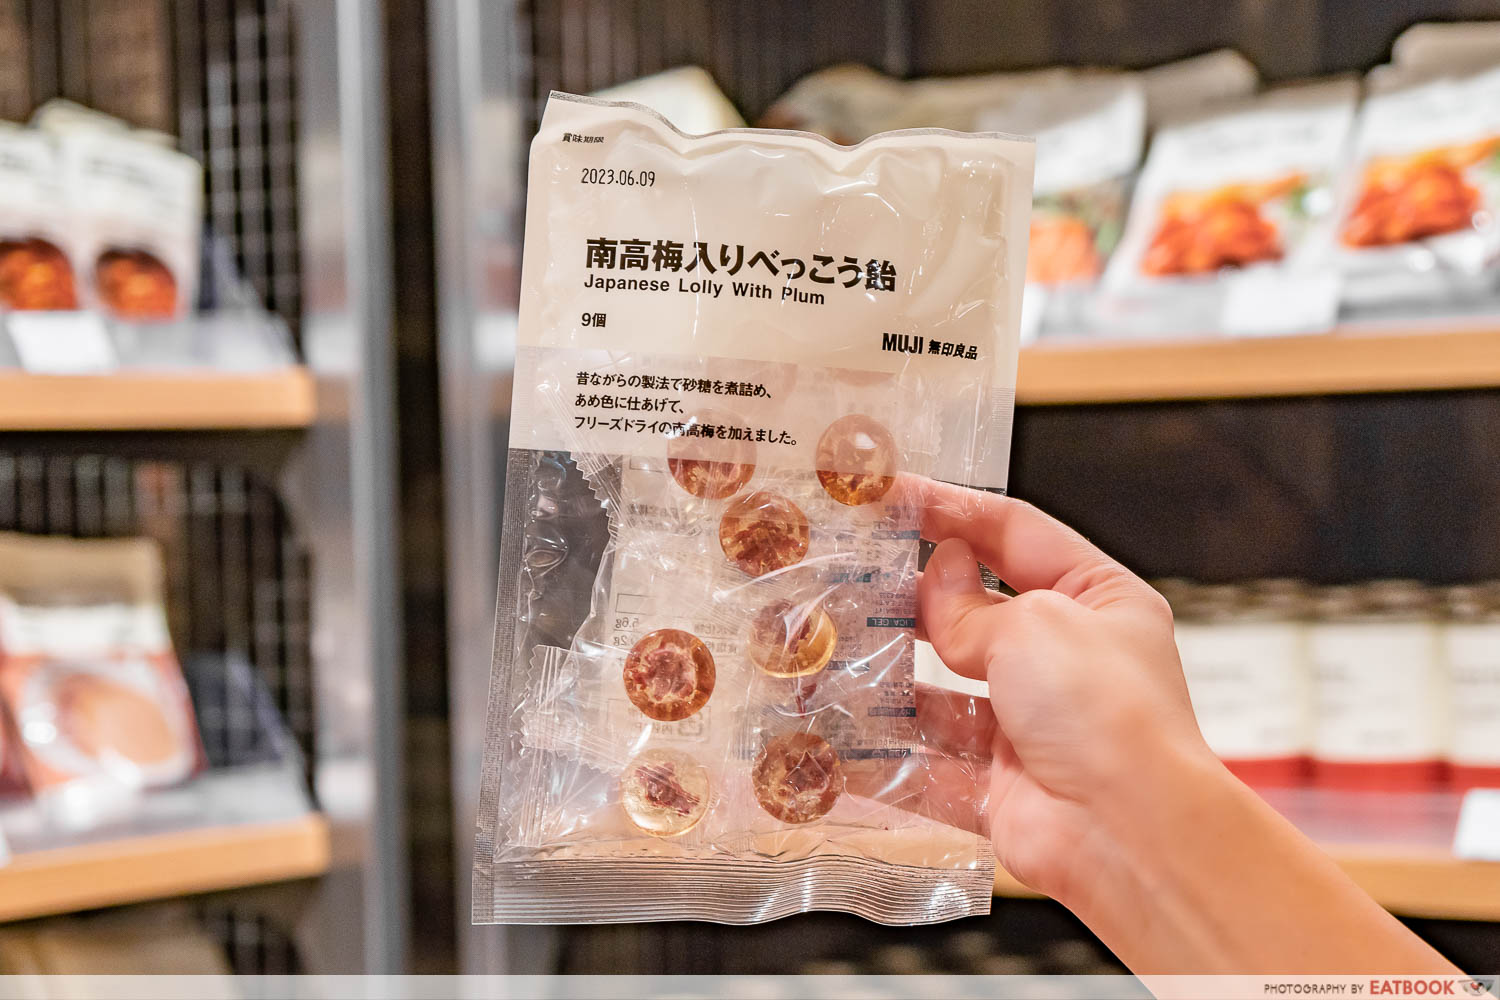 muji snacks - japanese lolly with plum